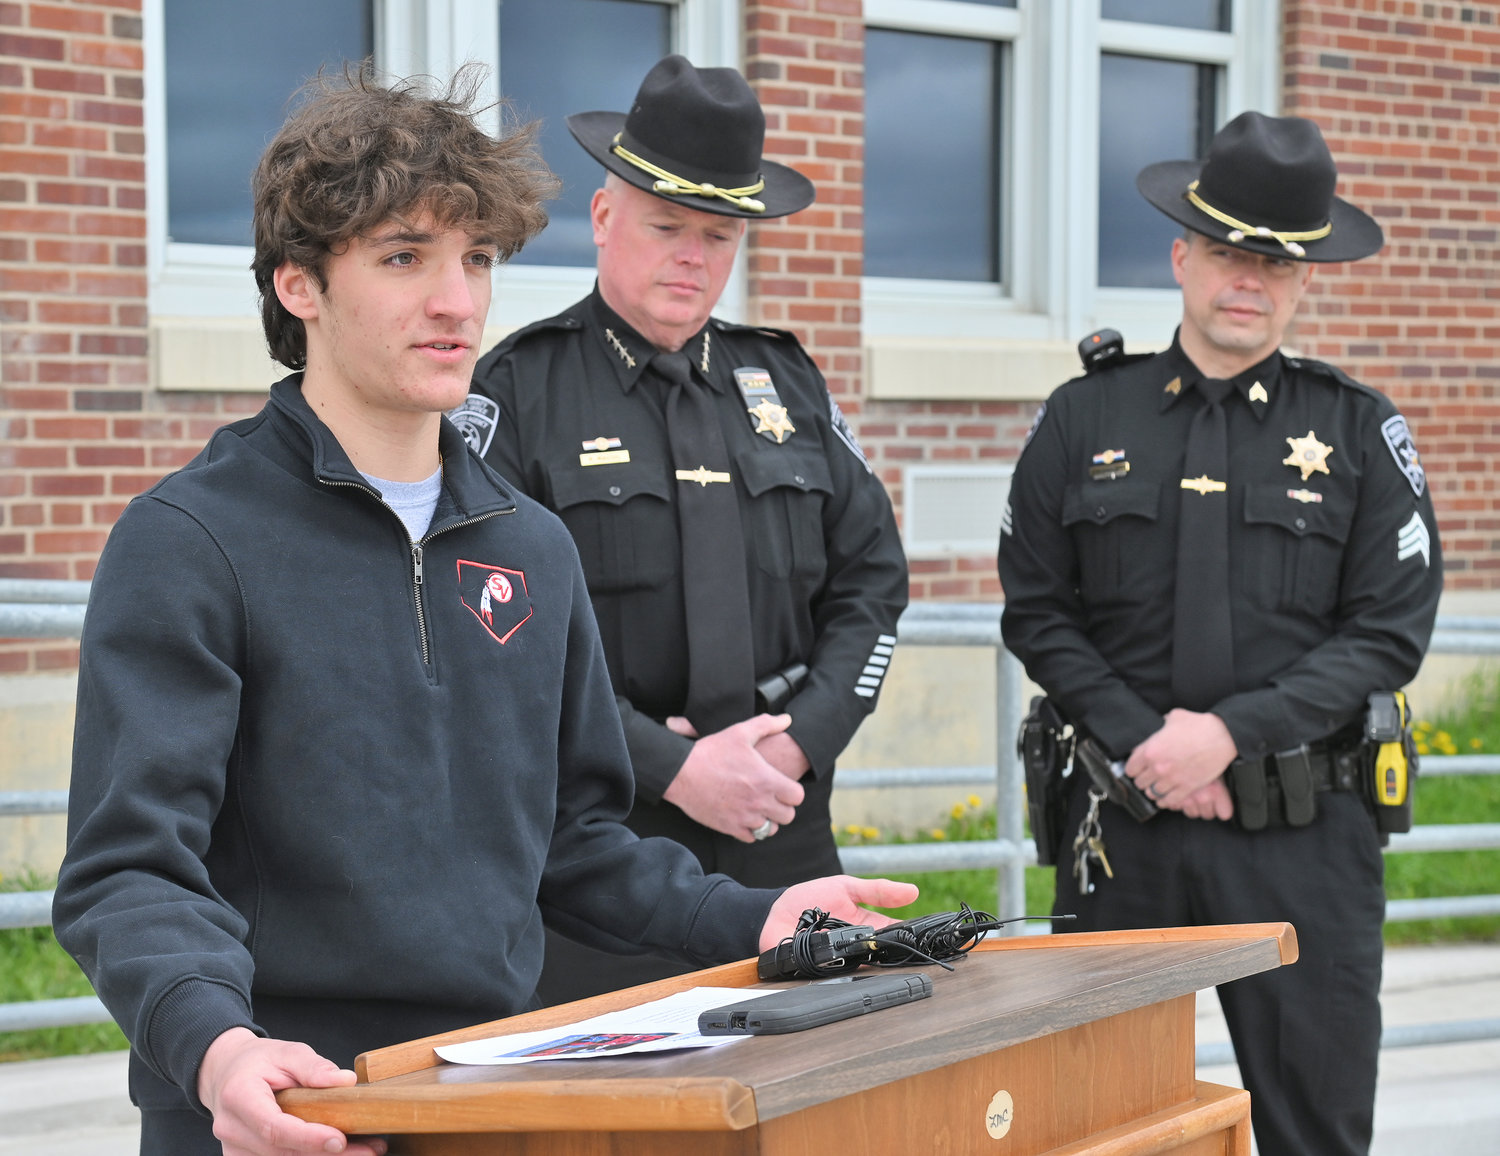 CLASS PRESIDENT SPEAKS — Sauquoit Valley High School senior class president Benjamin LoGalbo want his fellow students to stay safe as they approach prom and graduation season. He was joined outside his school Friday morning by Oneida County Sheriff Robert M. Maciol, center, and Sgt. Carey Phair.